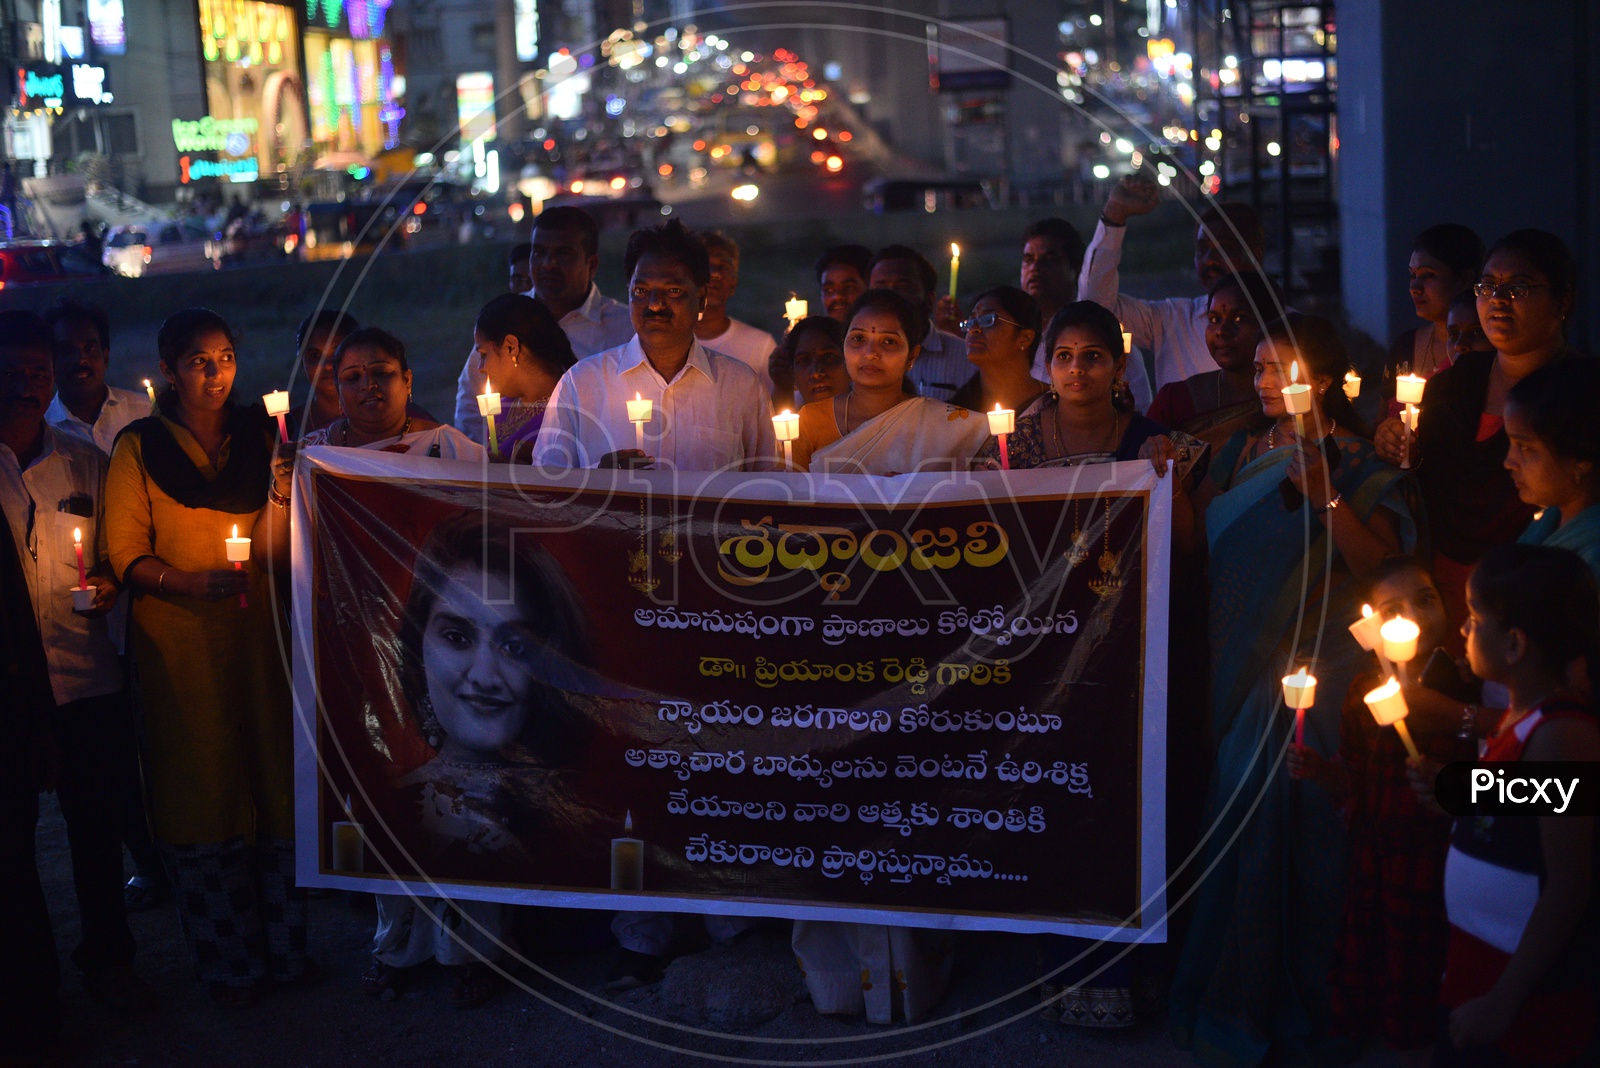 Residents of KPHB,Hyderabad come out in solidarity and seeking justice for woman veterinarian doctor,Disha(name changed), who has been brutally raped and murdered in Hyderabad on 28,November,2019